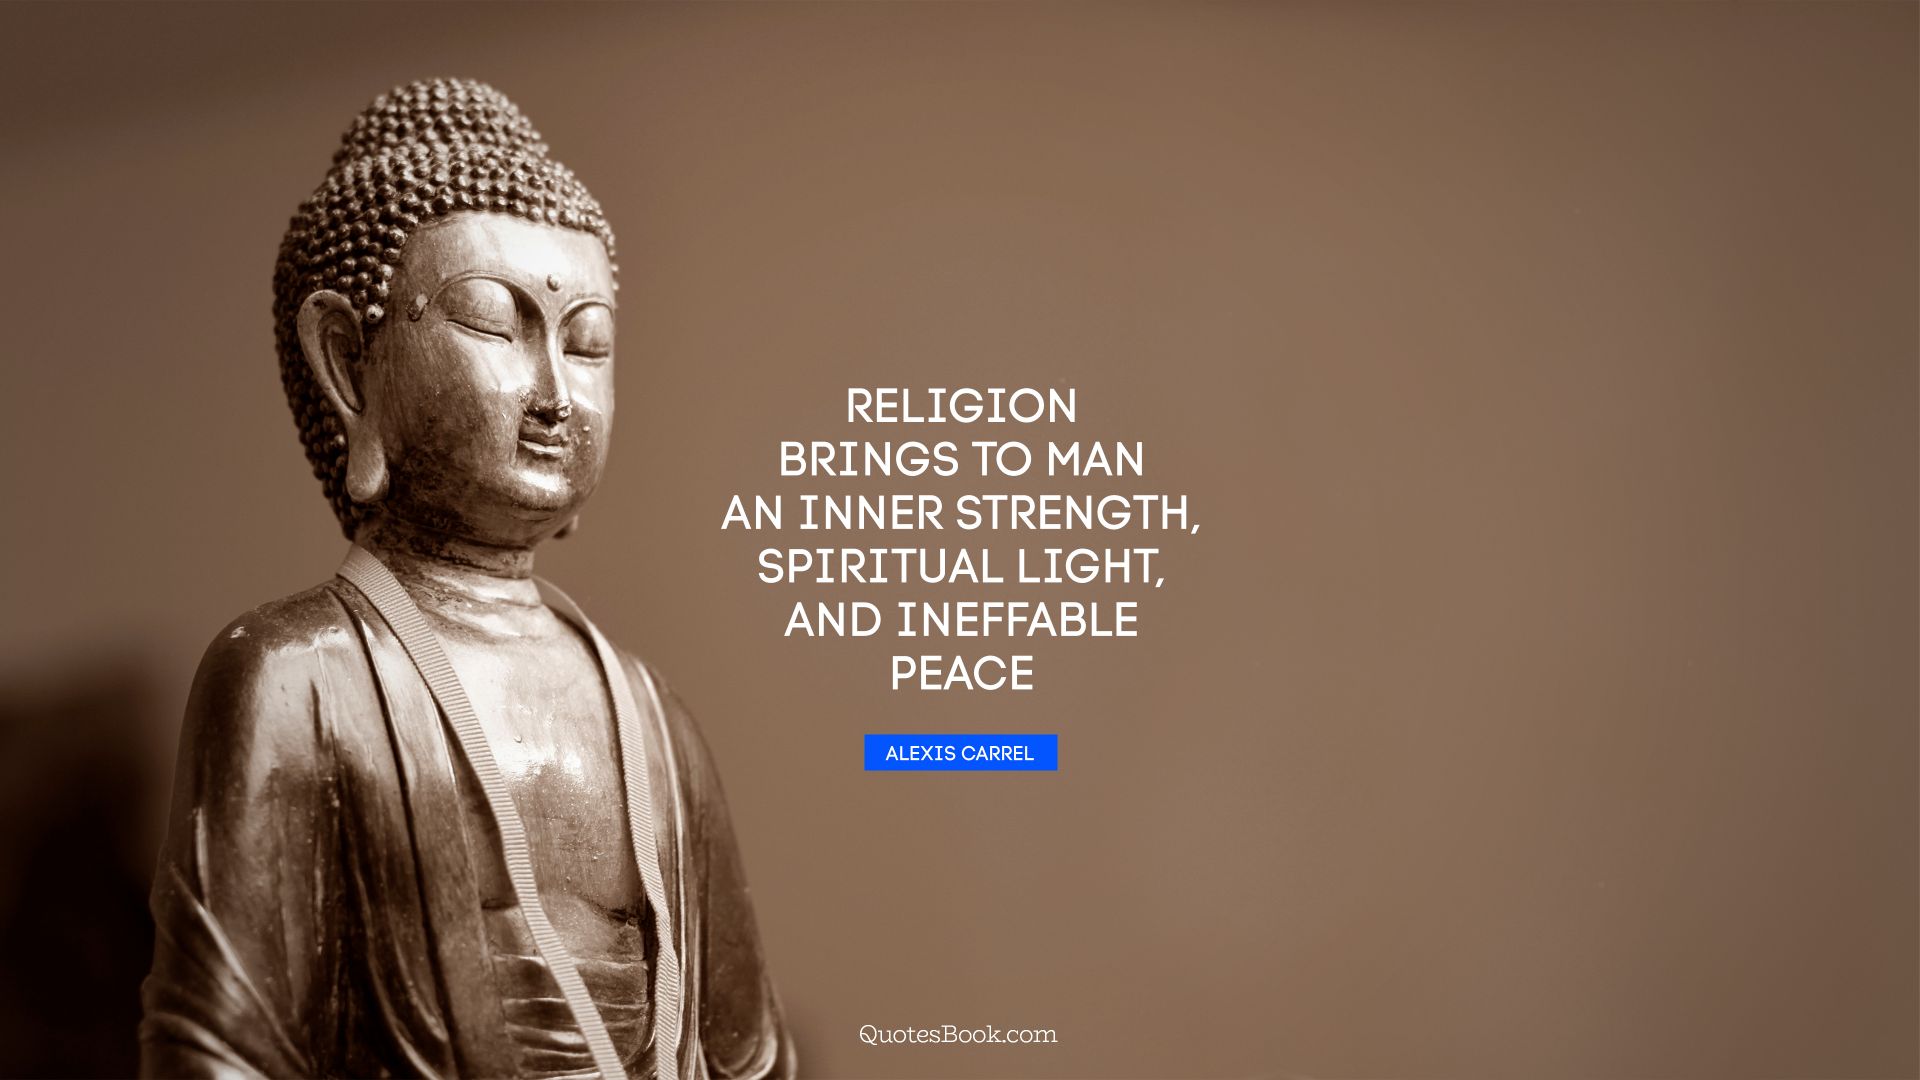 Religion brings to man an inner strength, spiritual light, and ineffable peace. - Quote by Alexis Carrel